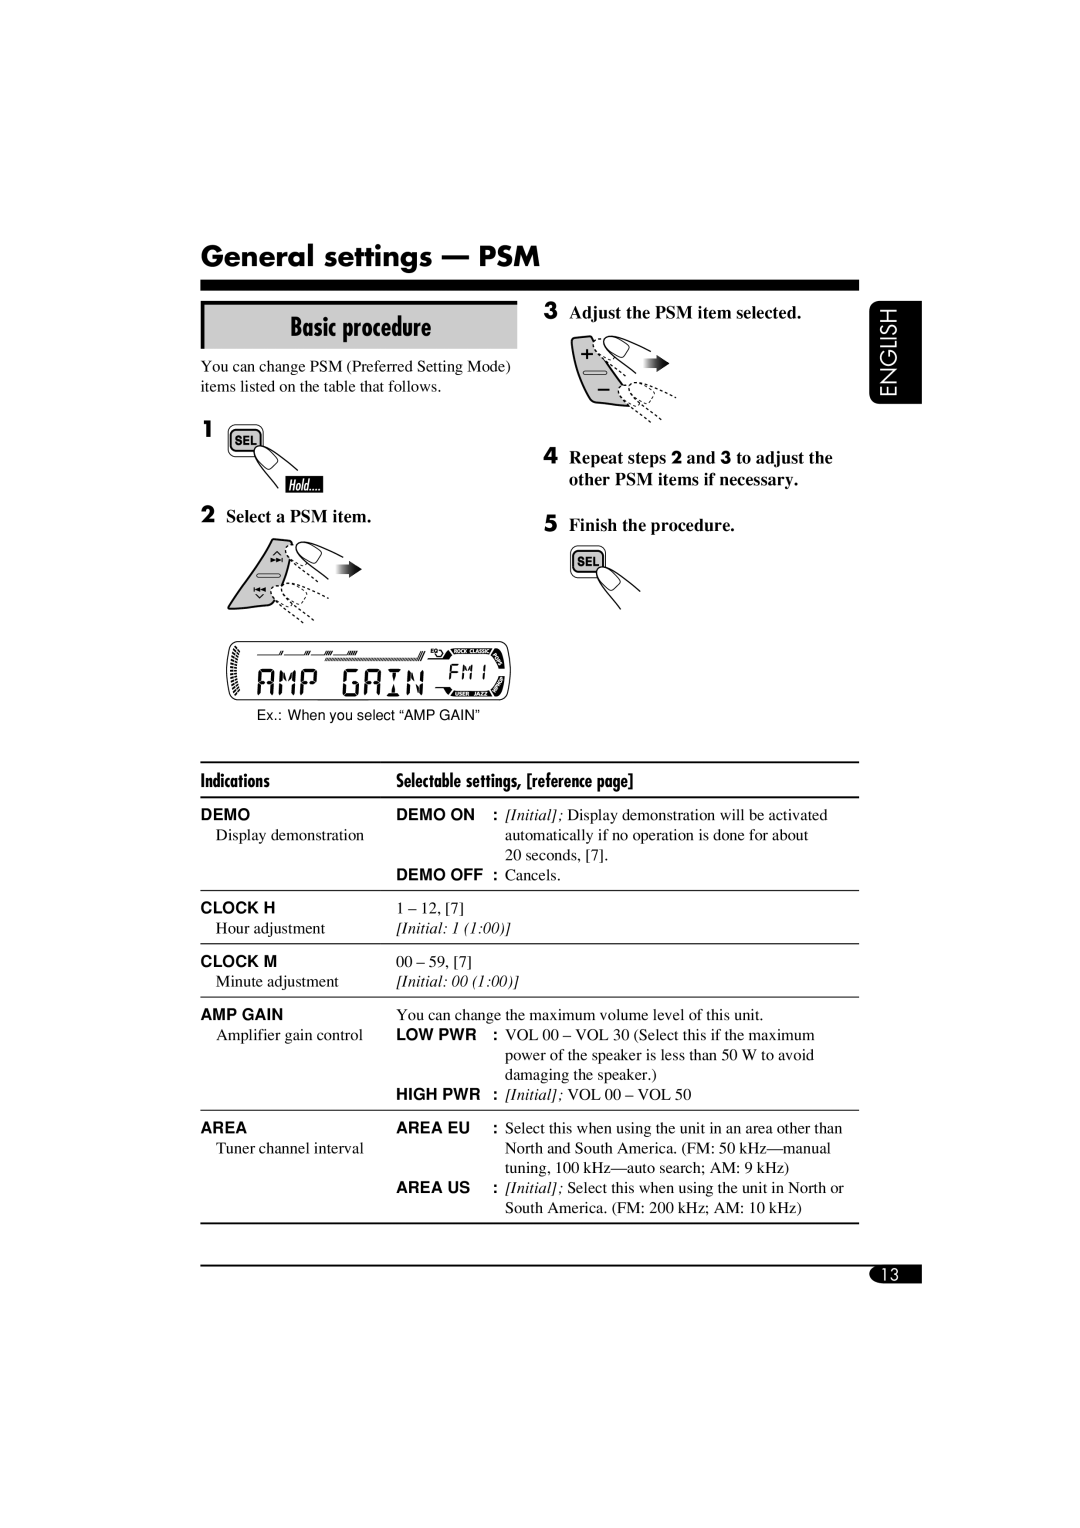 JVC KD-S12 General settings - PSM, Basic procedure, 2Select a PSM item, 3Adjust the PSM item selected, English, Demo, Area 